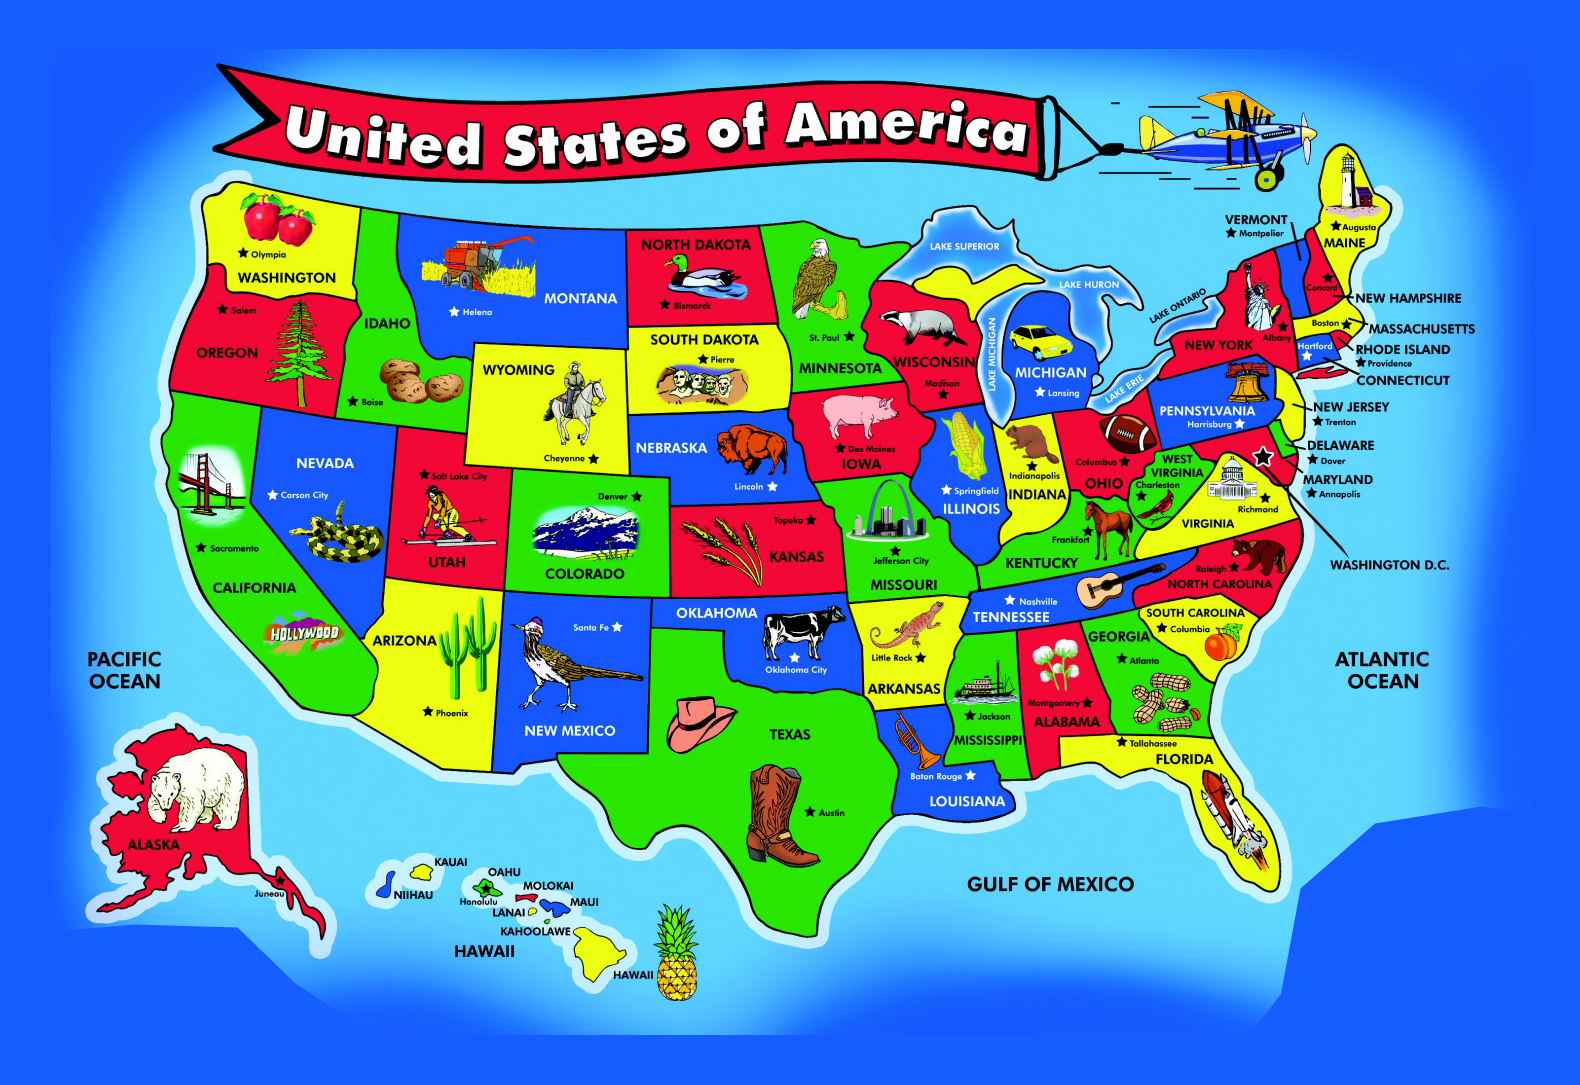 large-kids-map-of-the-usa-usa-maps-of-the-usa-maps-collection-of-the-united-states-of-america